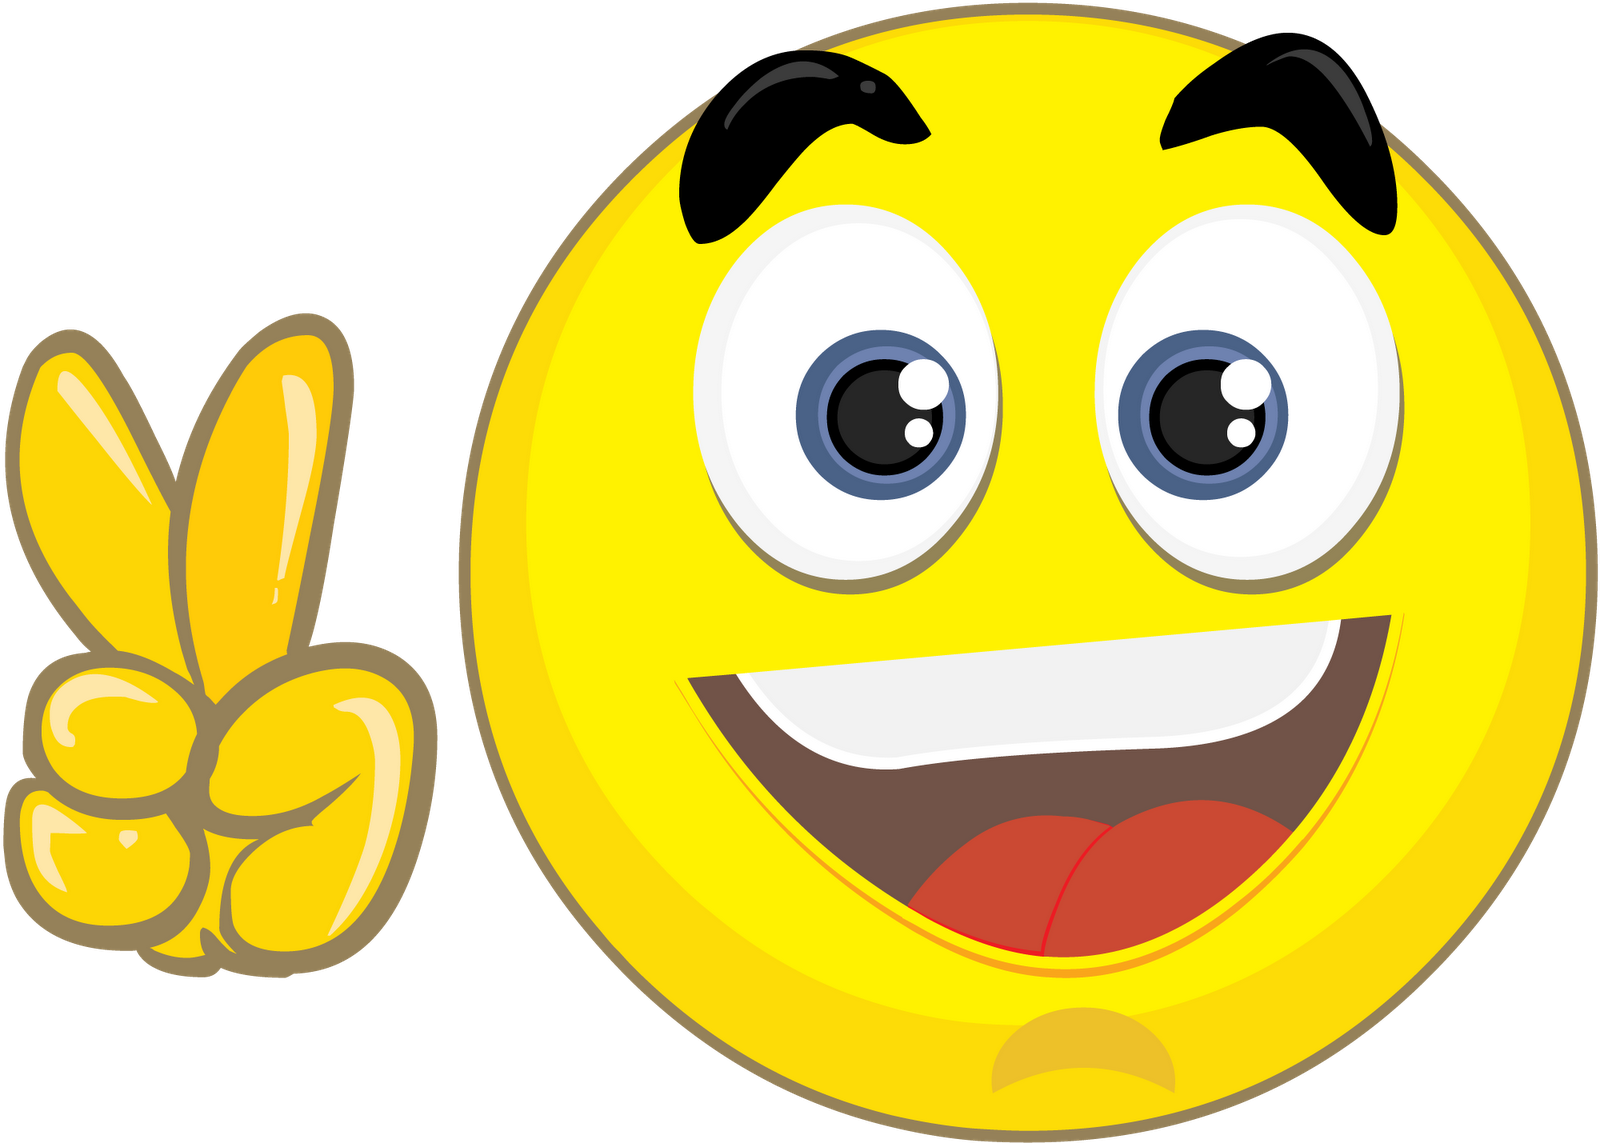 14 Cool Smileys/Emoticons (My Collection) | Smiley Symbol